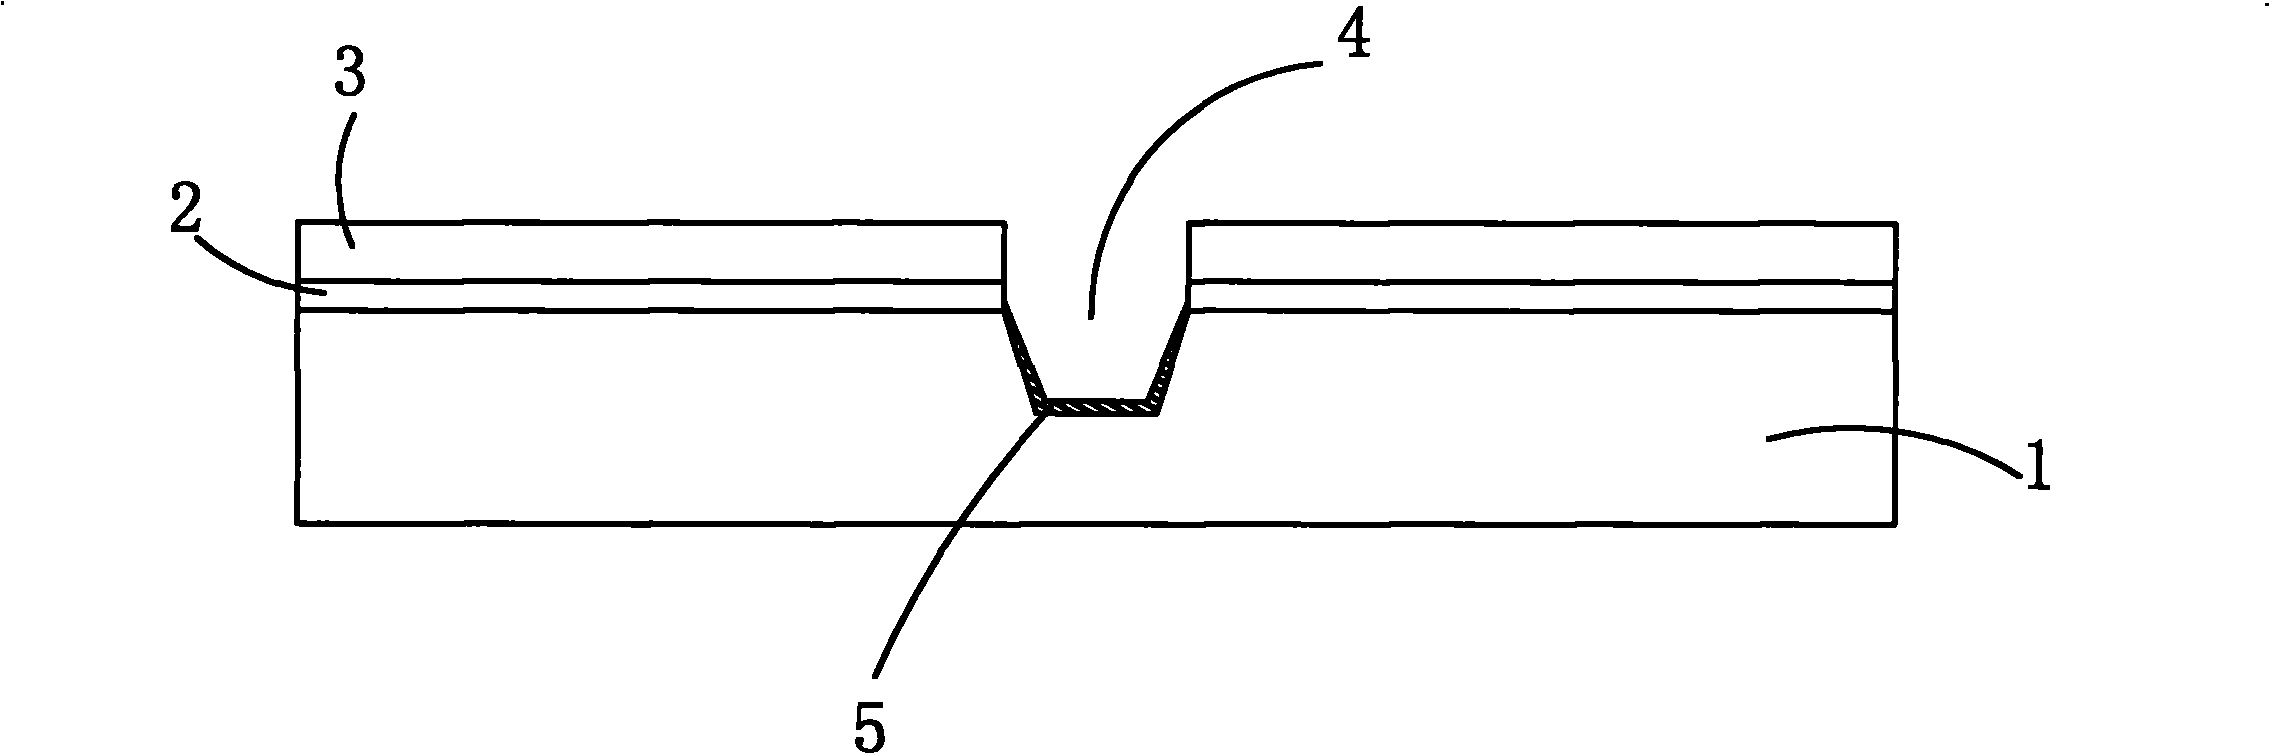 Semiconductor shallow trench isolation method